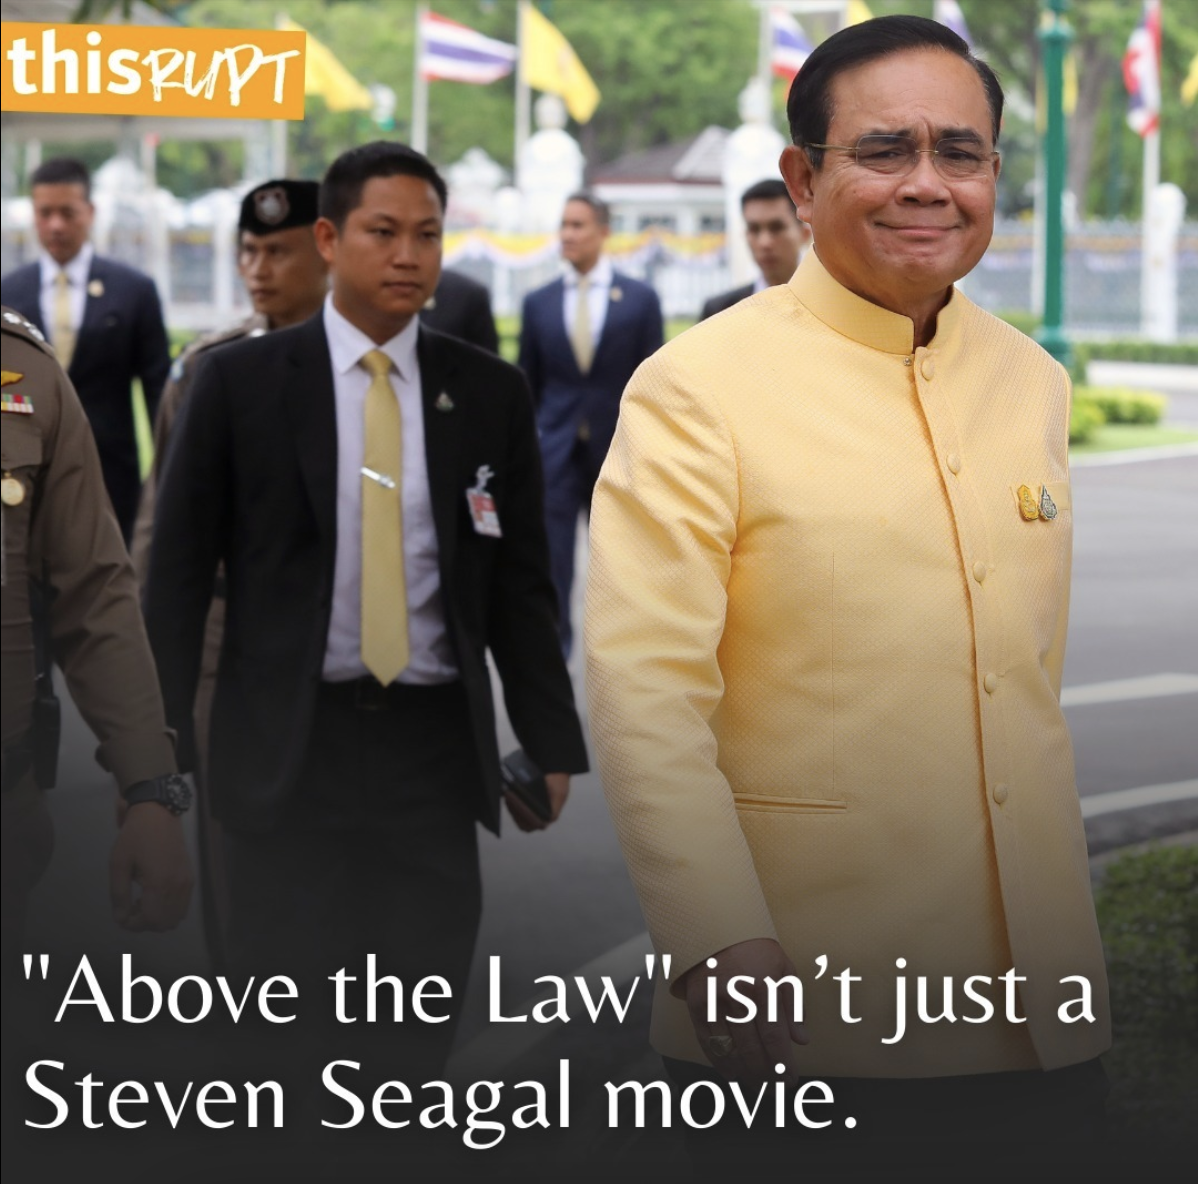 Power & Privilege: General Prayut can do no wrong